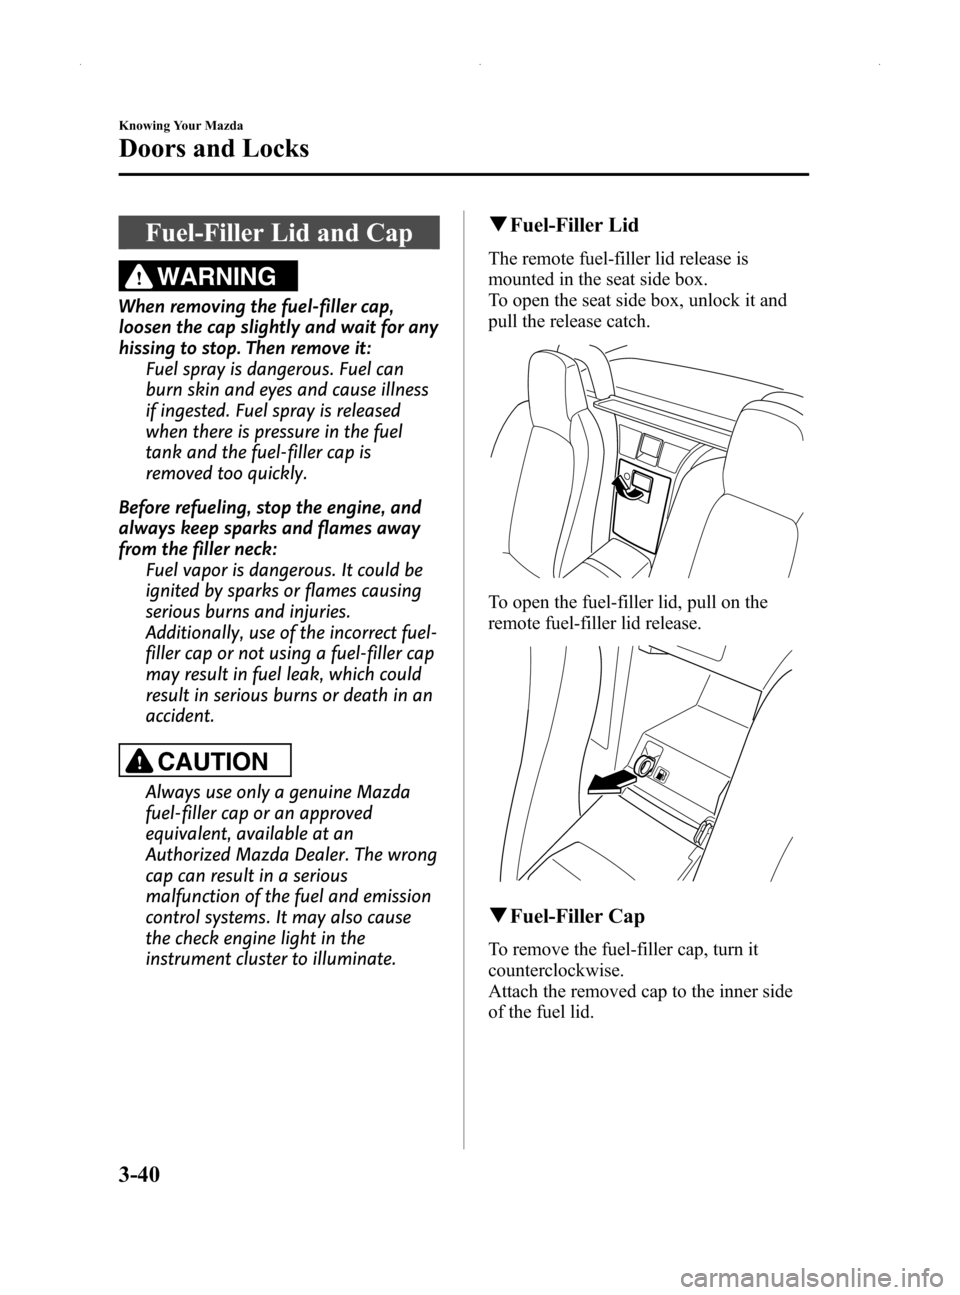 MAZDA MODEL MX-5 2014  Owners Manual (in English) Black plate (94,1)
Fuel-Filler Lid and Cap
WARNING
When removing the fuel-filler cap,
loosen the cap slightly and wait for any
hissing to stop. Then remove it:Fuel spray is dangerous. Fuel can
burn sk